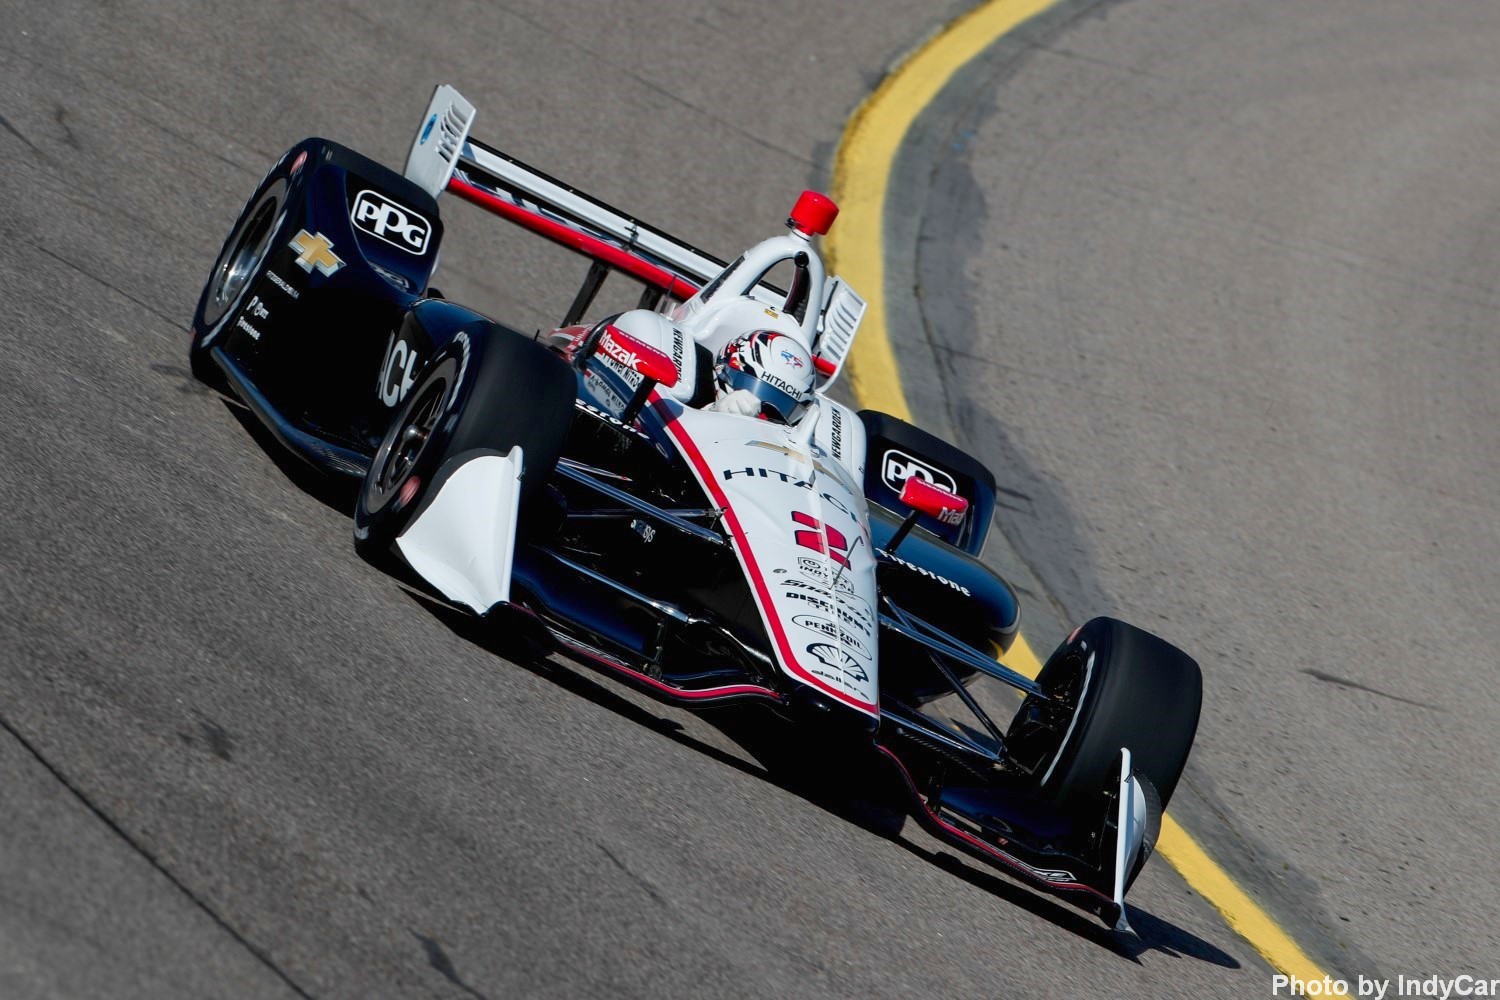 Newgarden did not have quite enough, but watch him in the race